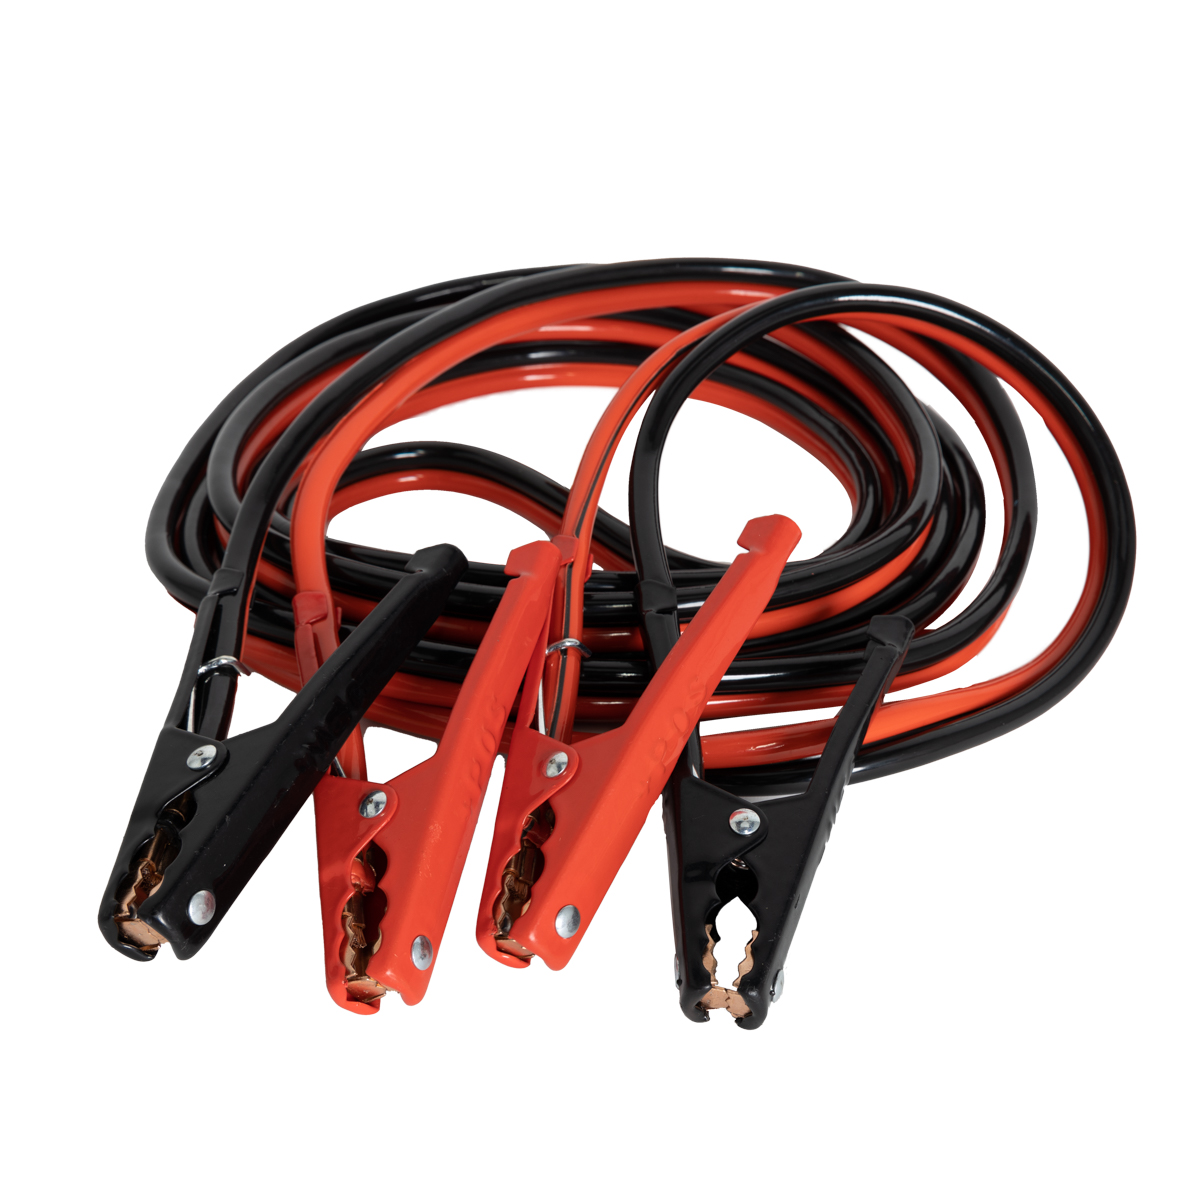 RoadPro RP04851 8 Gauge Booster Cables Jump Starter Automotive Cables 12-Feet Car Battery Jumpers